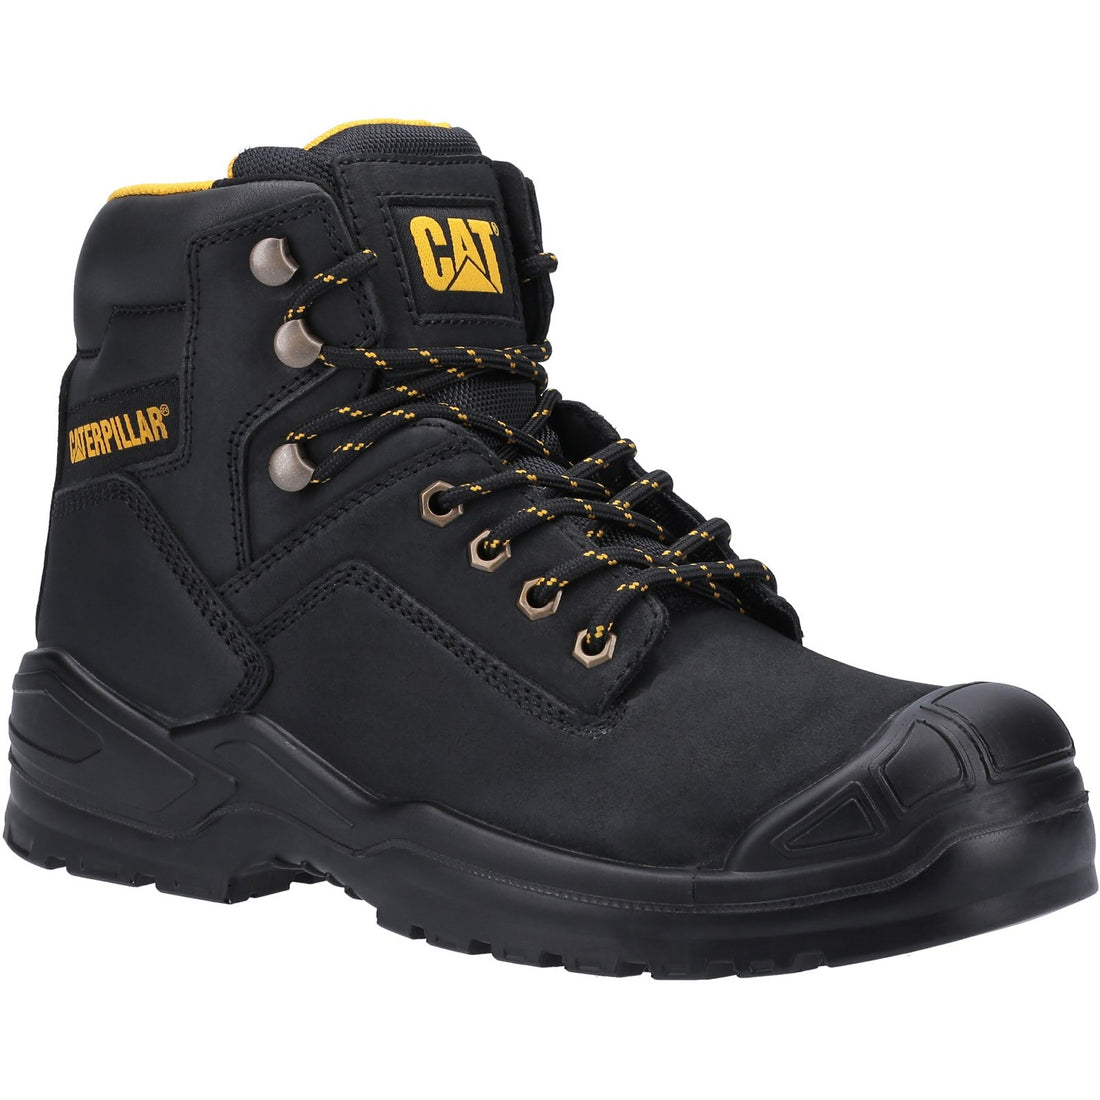 Caterpillar Striver Mid S3 Safety Boot in Black